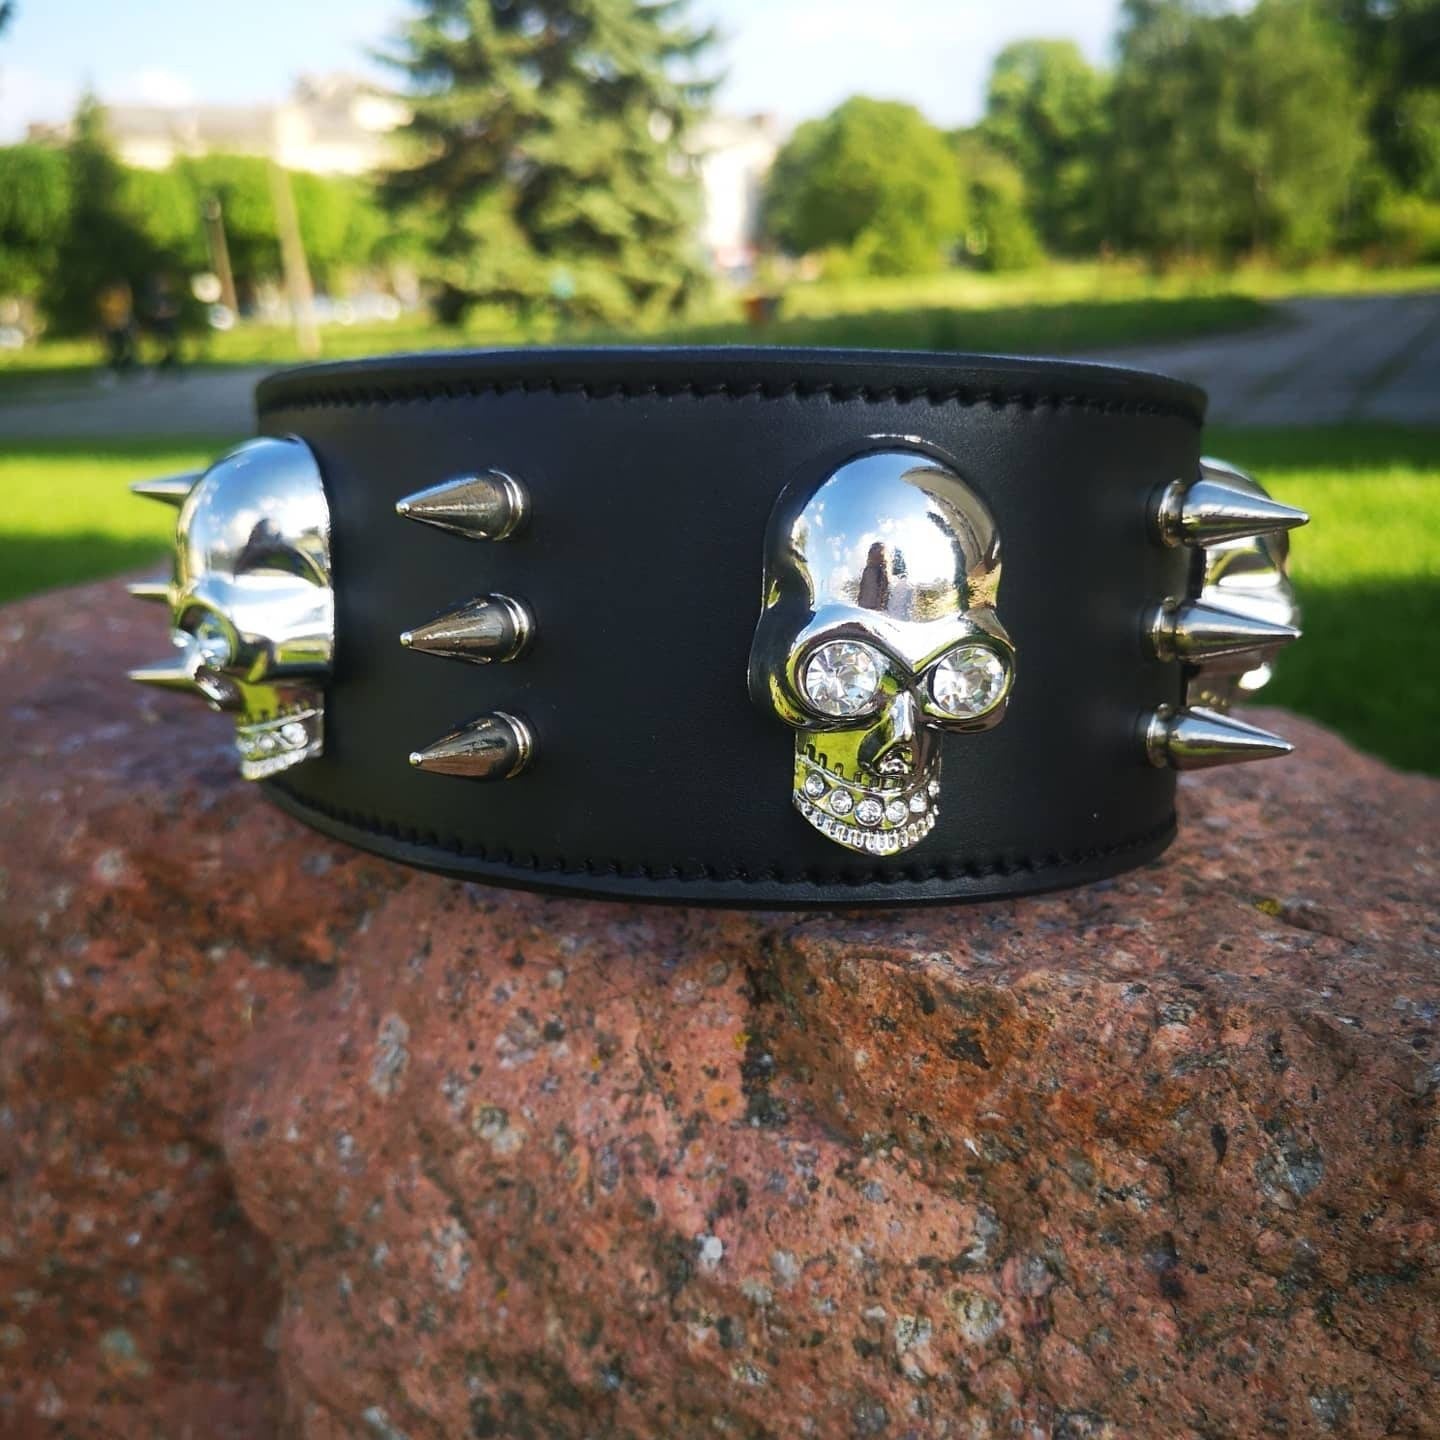 Leather Wide  Dog Collar Decorated with Skulls and Spikes, Spiked Dog Collar for Big and Strong Dog, Dog Collar with Stainless Steel Buckle